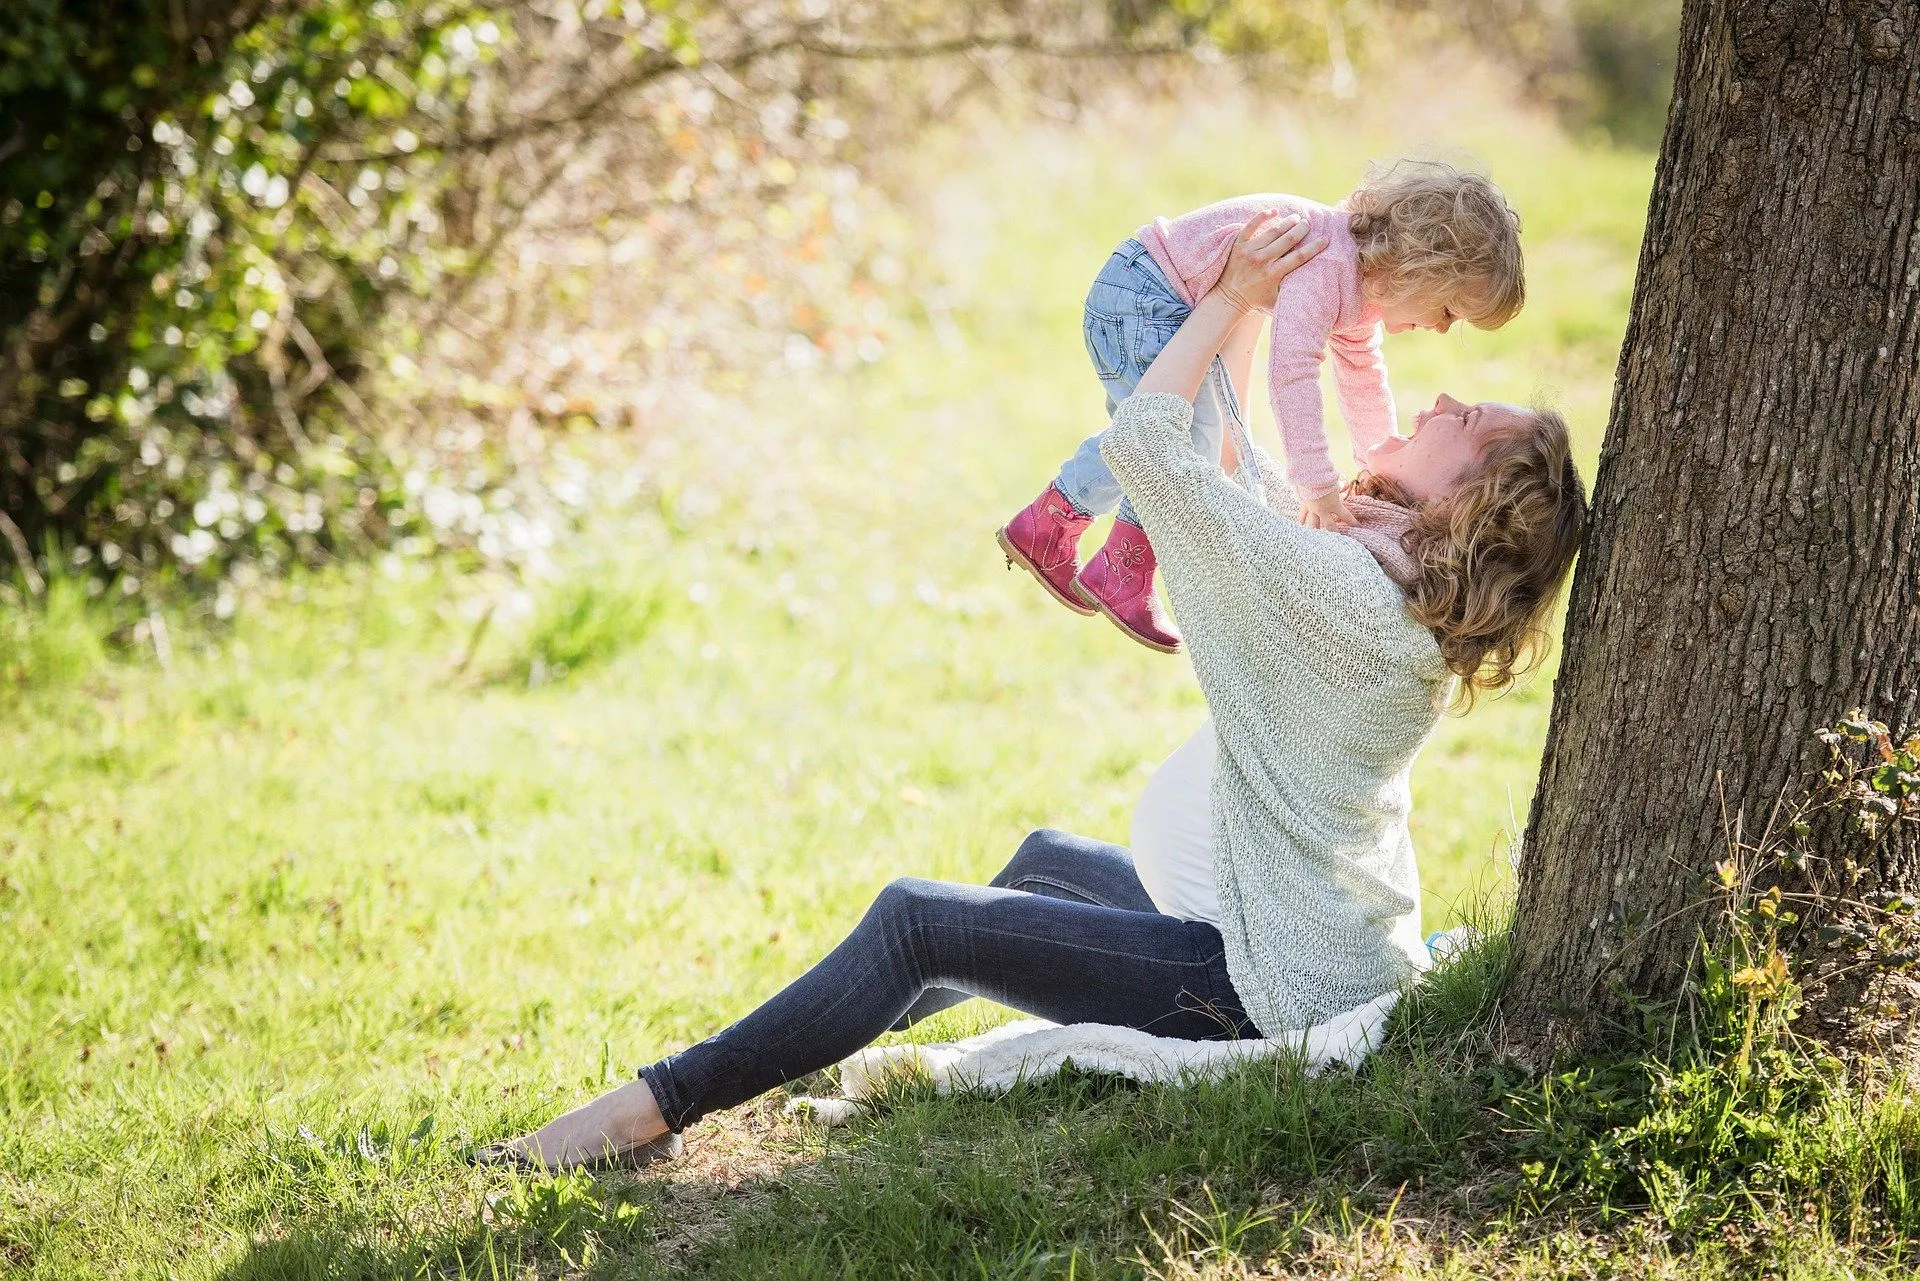 A mother raises her small daughter into the air, while sat beneath a tree in summer time.